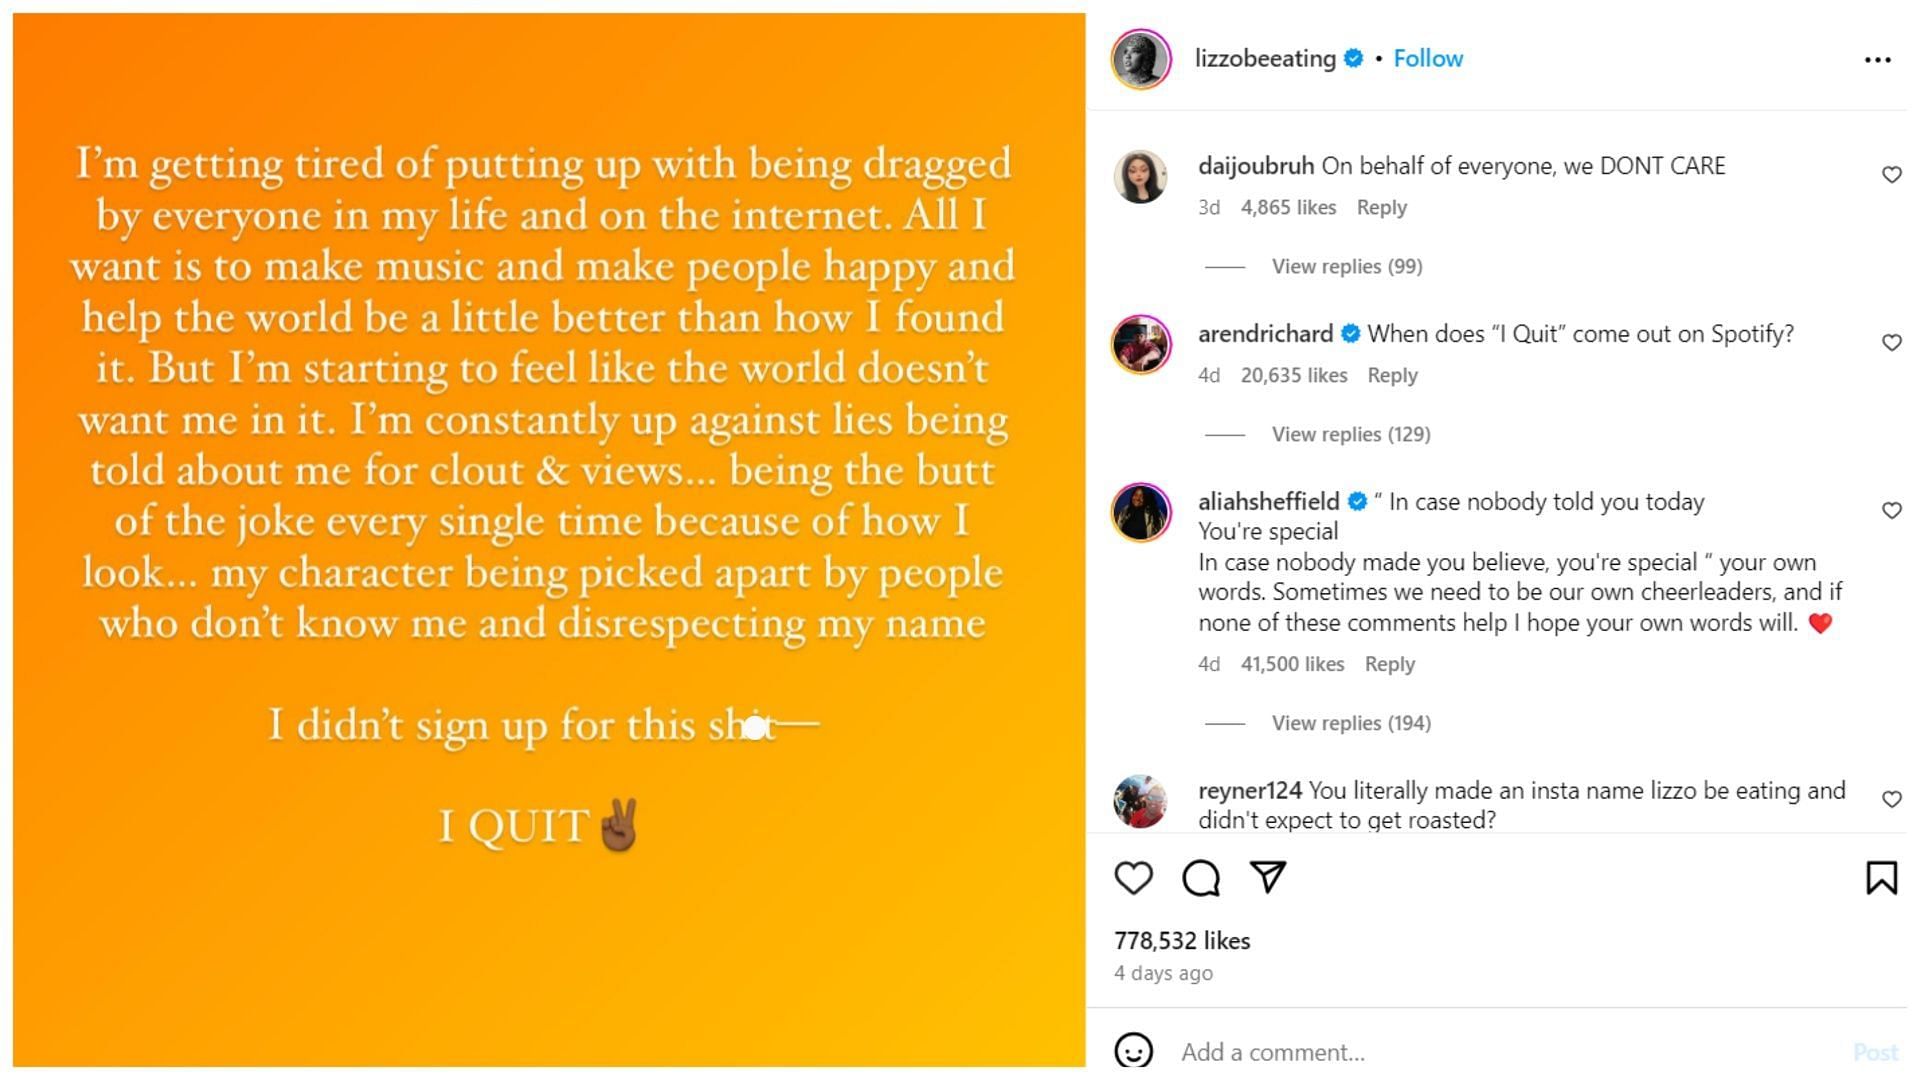 Lizzo&#039;s post about quitting. (Image via Instagram/ @lizzobeeating)